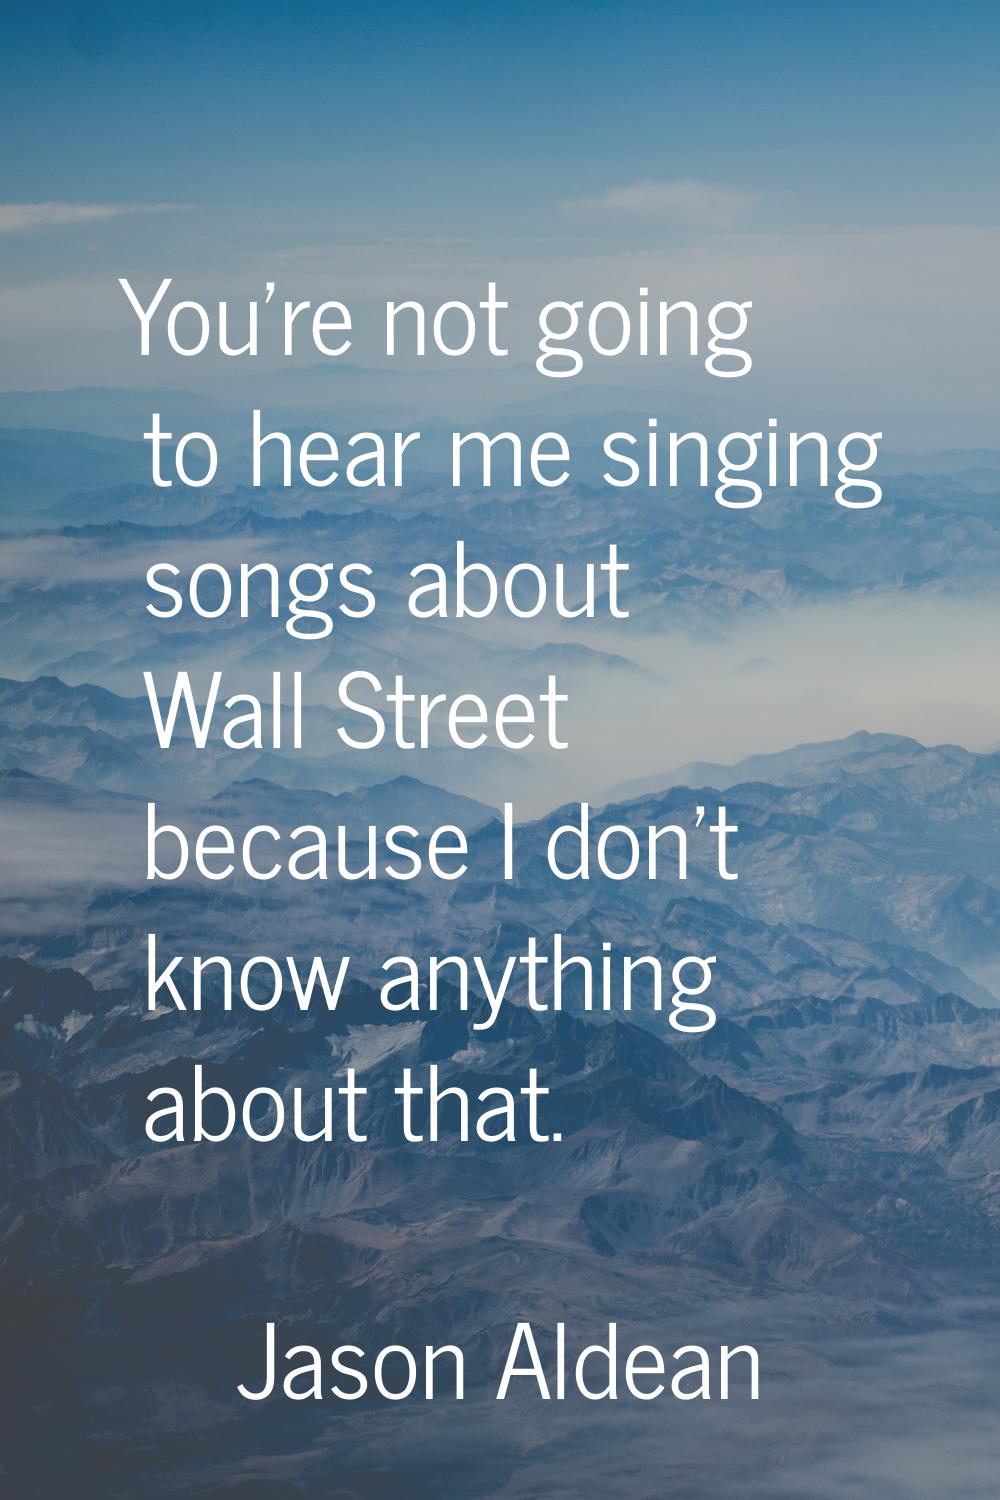 You're not going to hear me singing songs about Wall Street because I don't know anything about tha